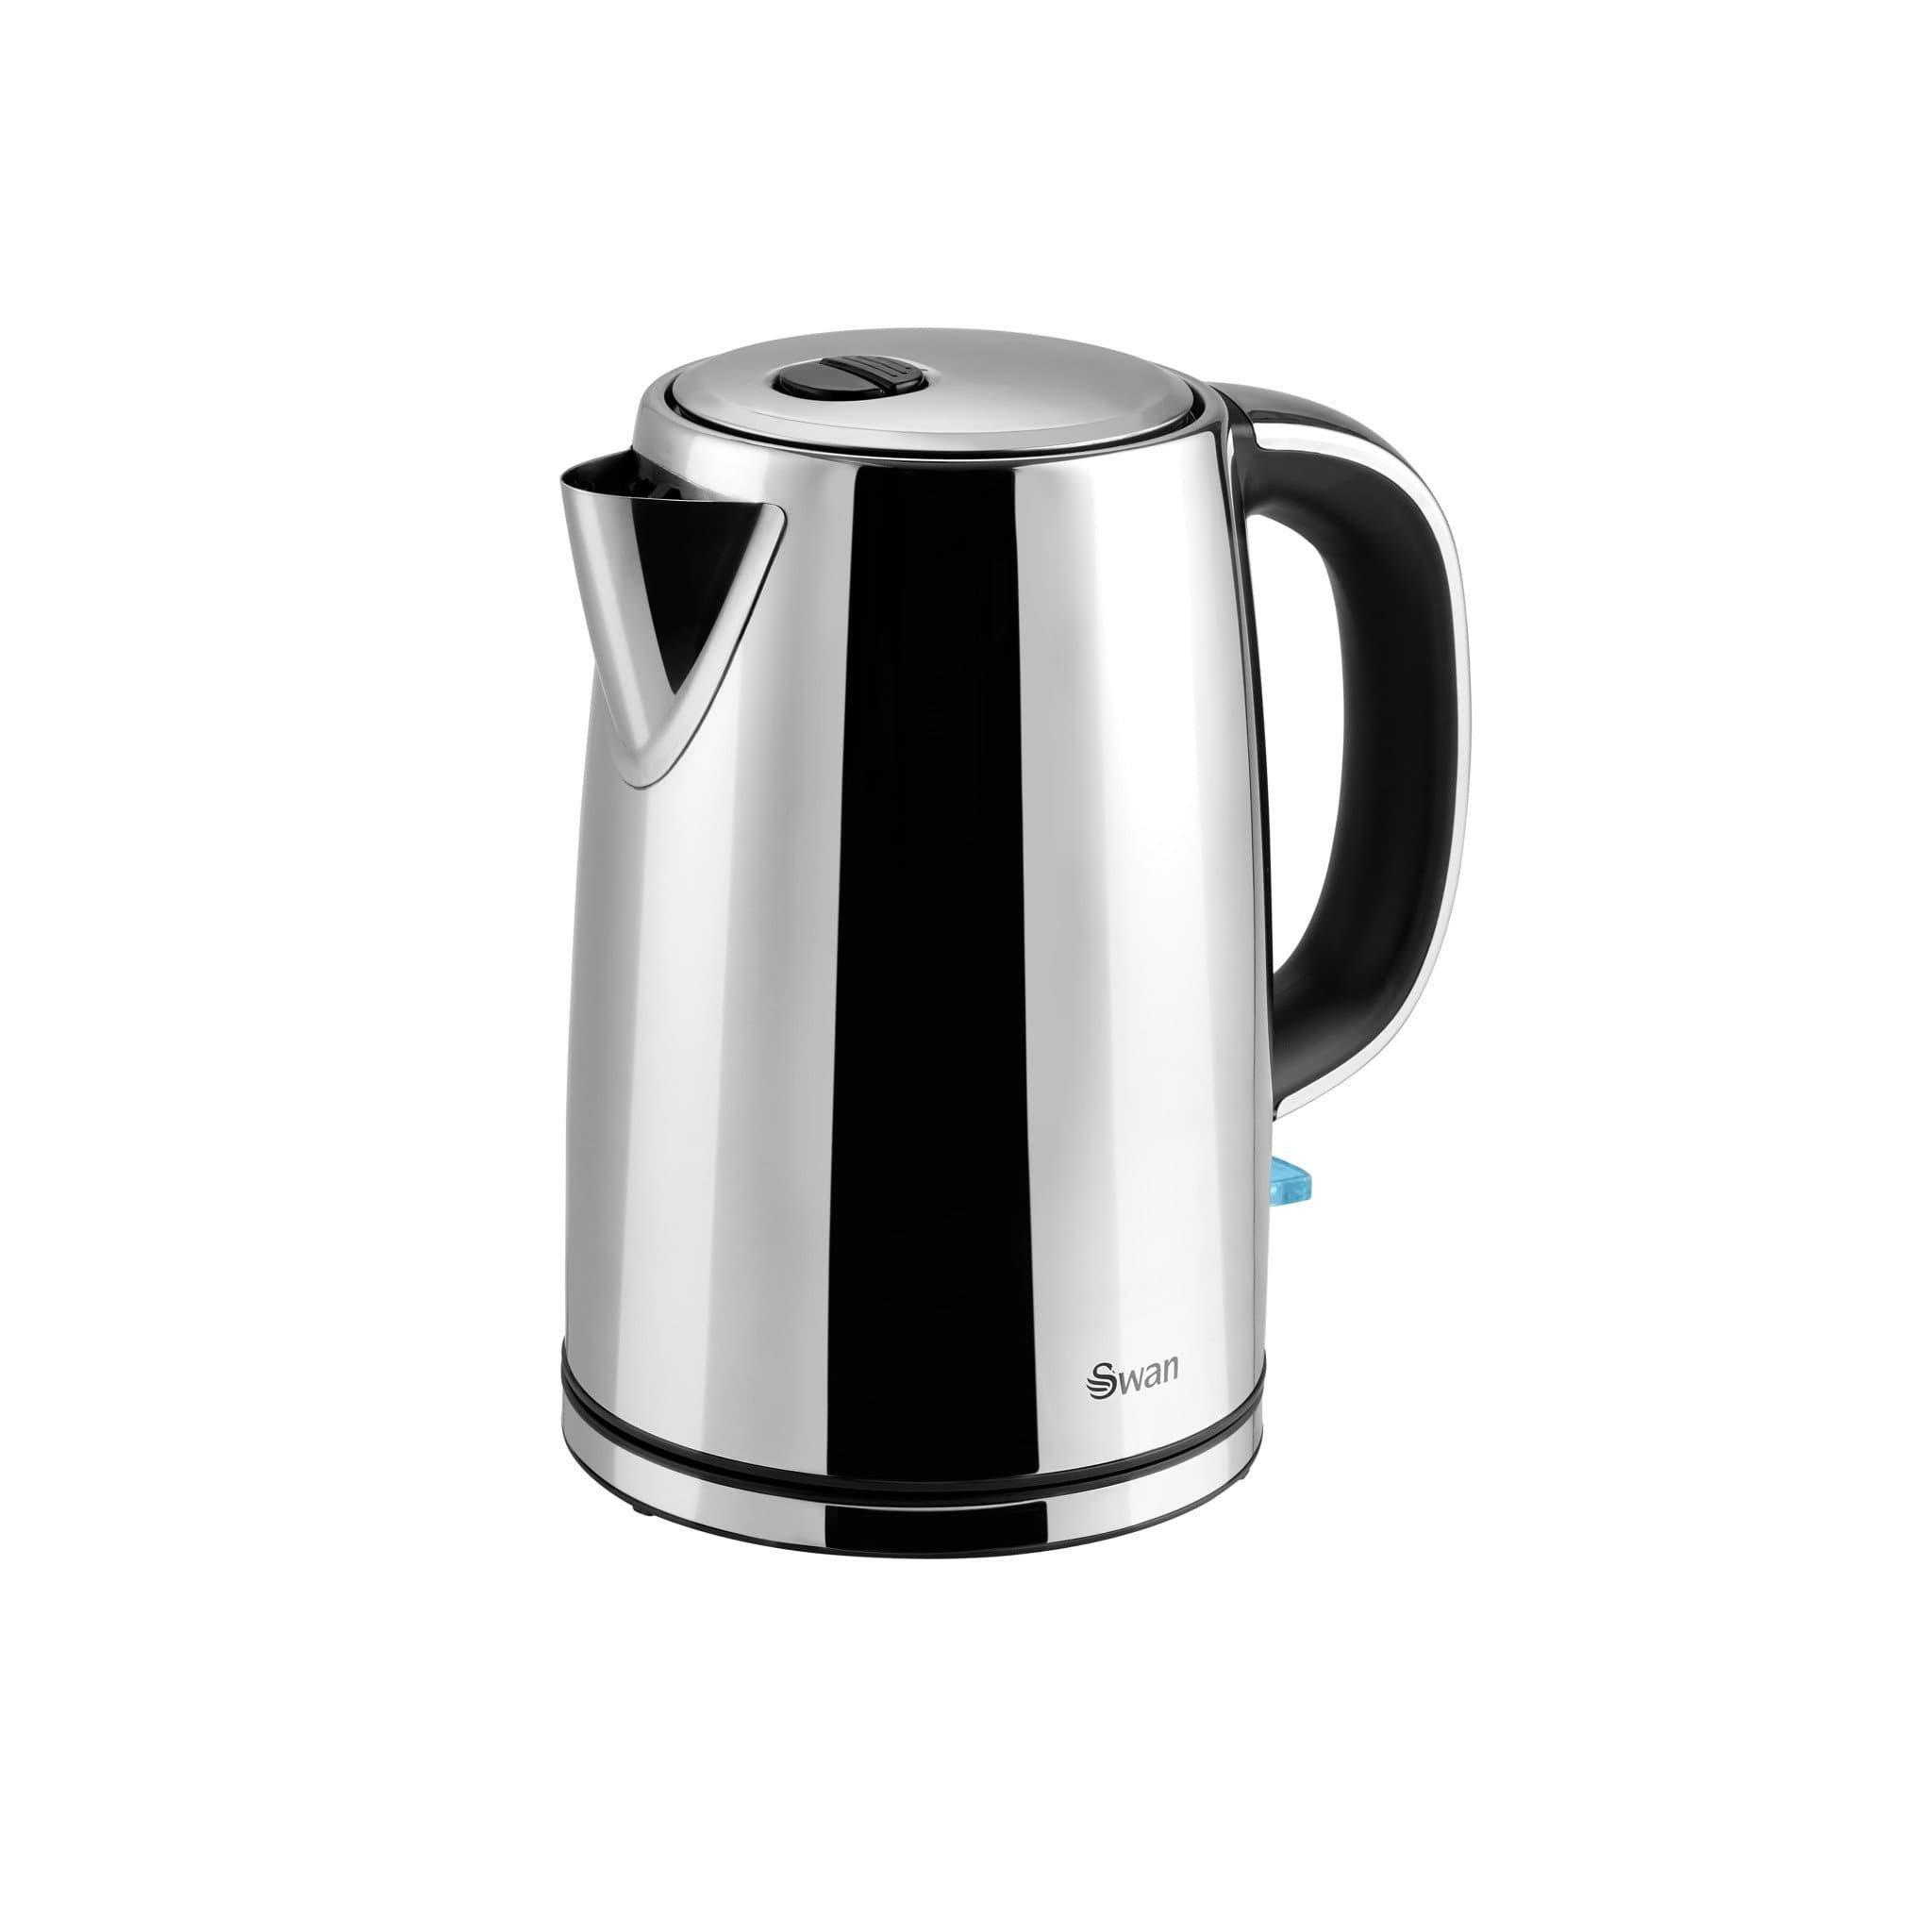 Swan Classic SK14060N Kettle - Polished Stainless Steel